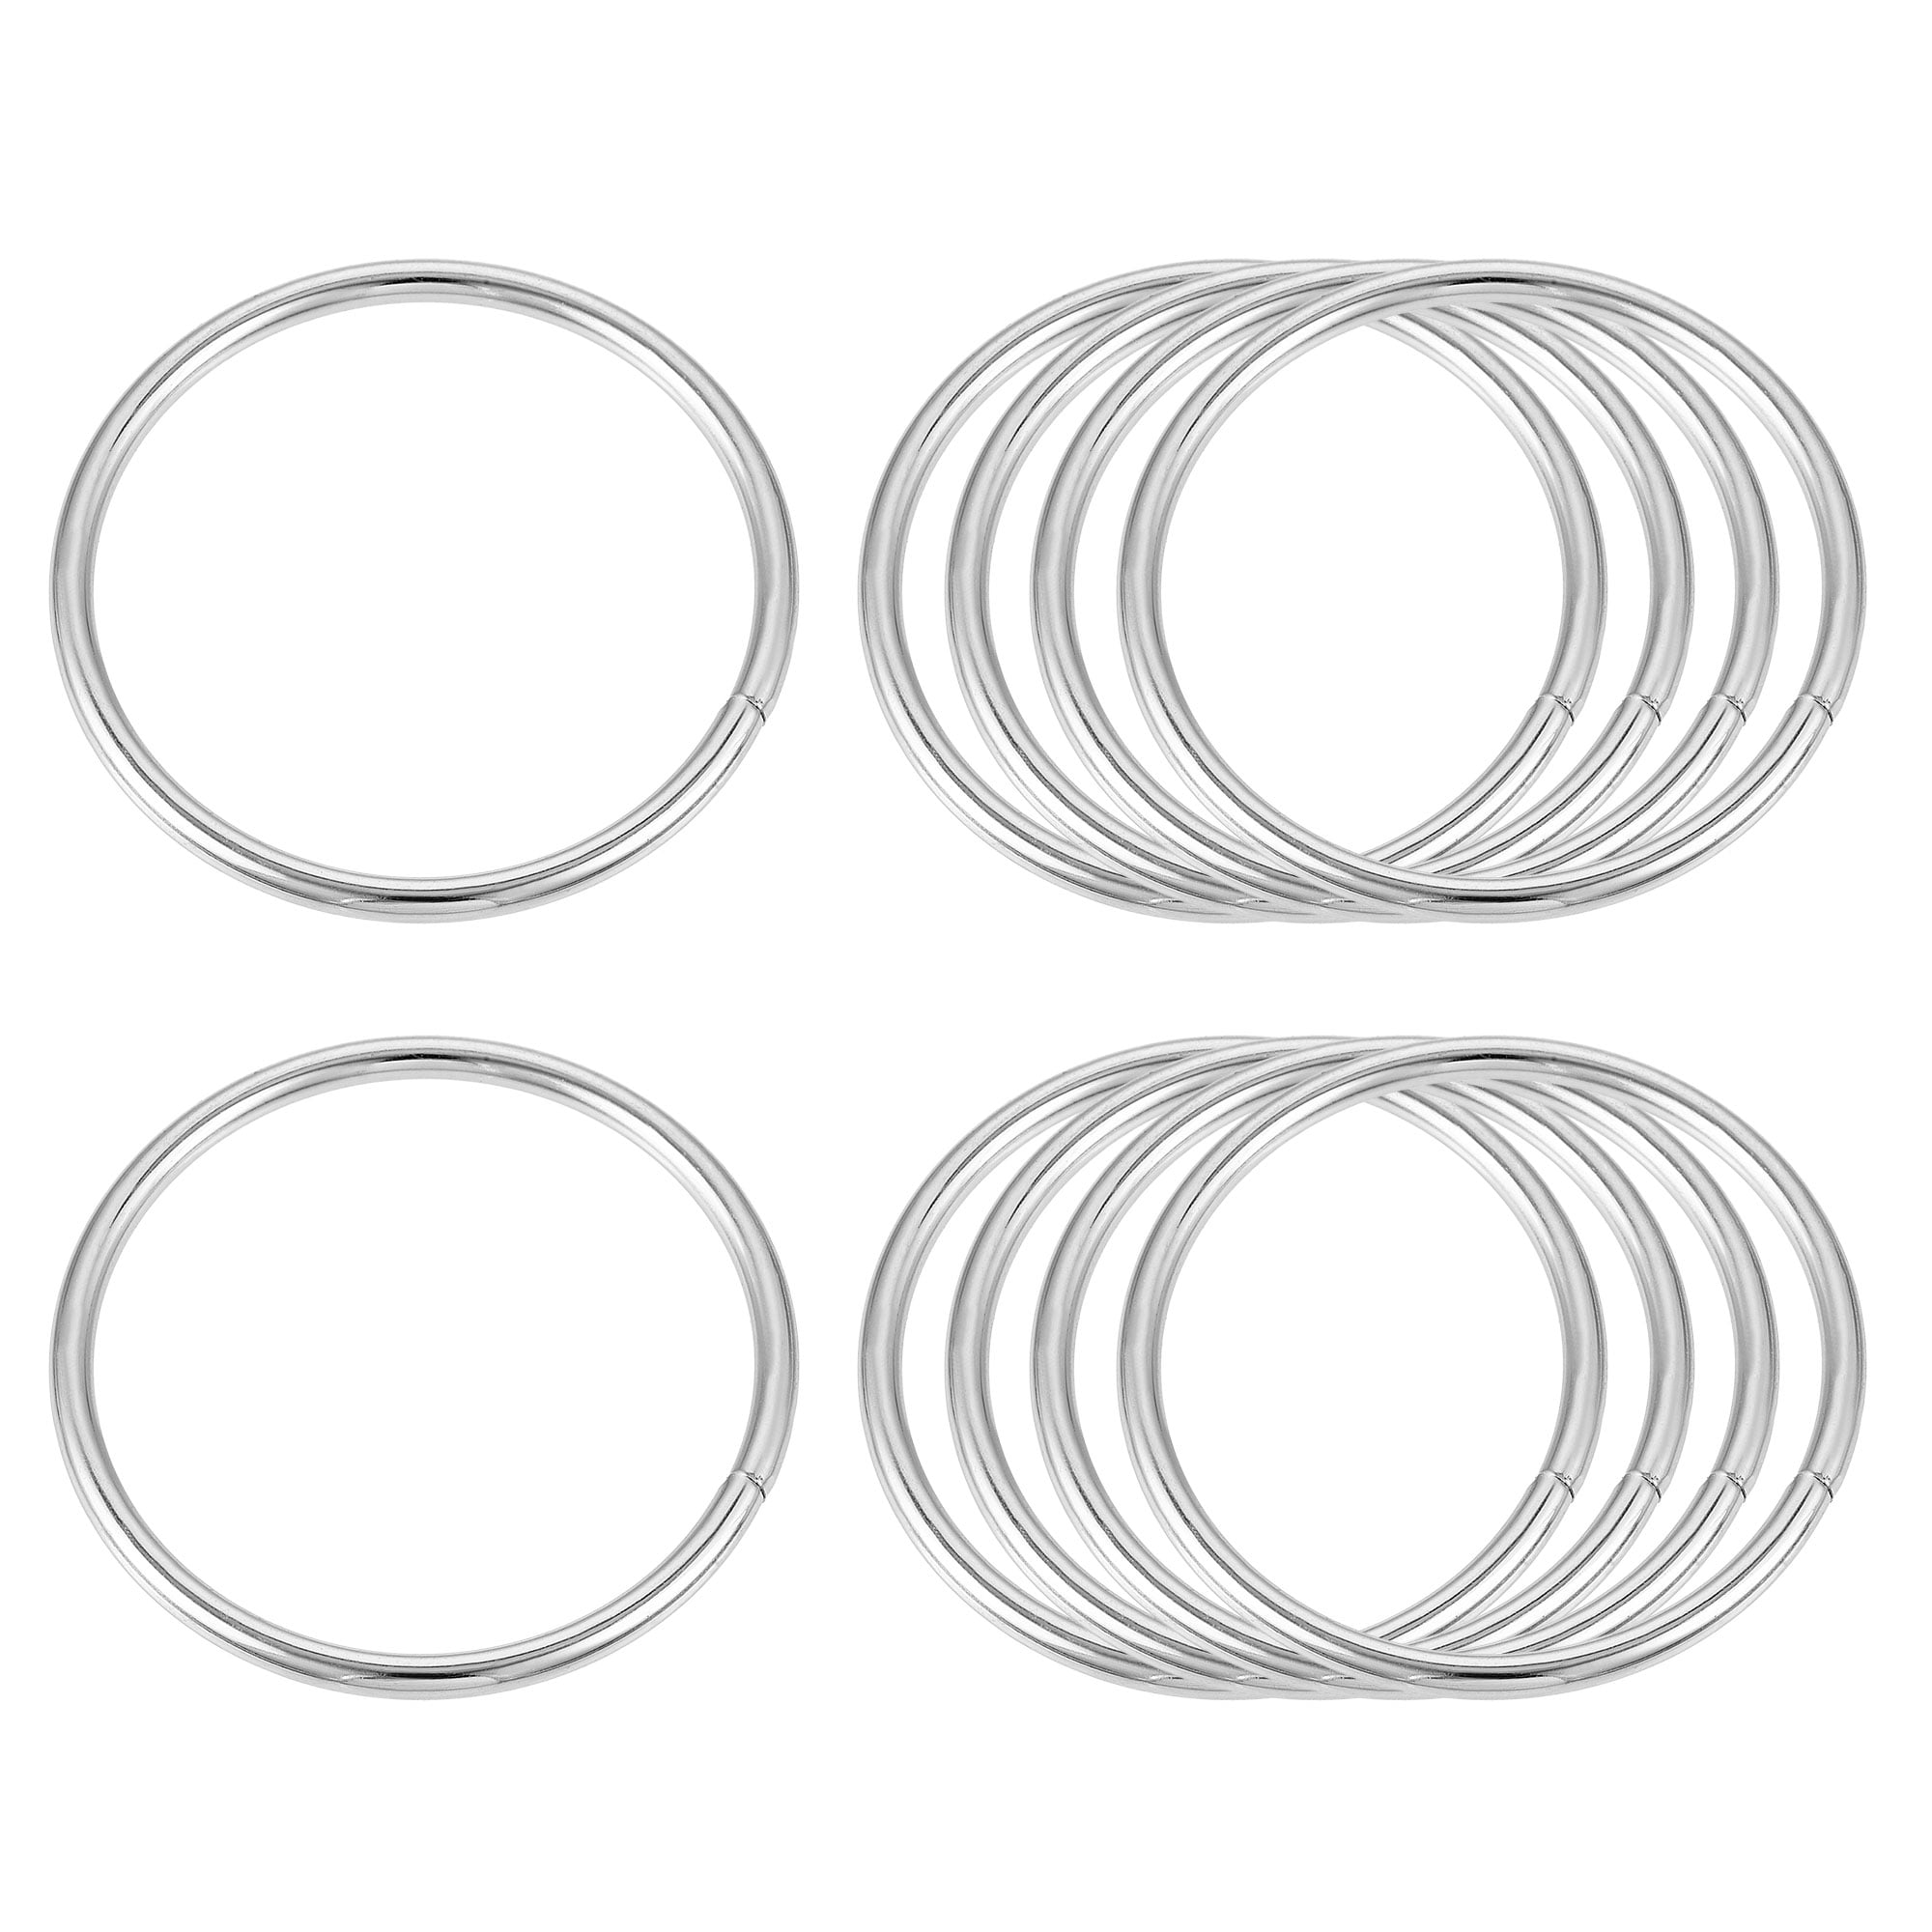 20Pcs Rubber O-Ring OD 5mm to 50mm Select Variations 1.9mm Cross Section |  eBay